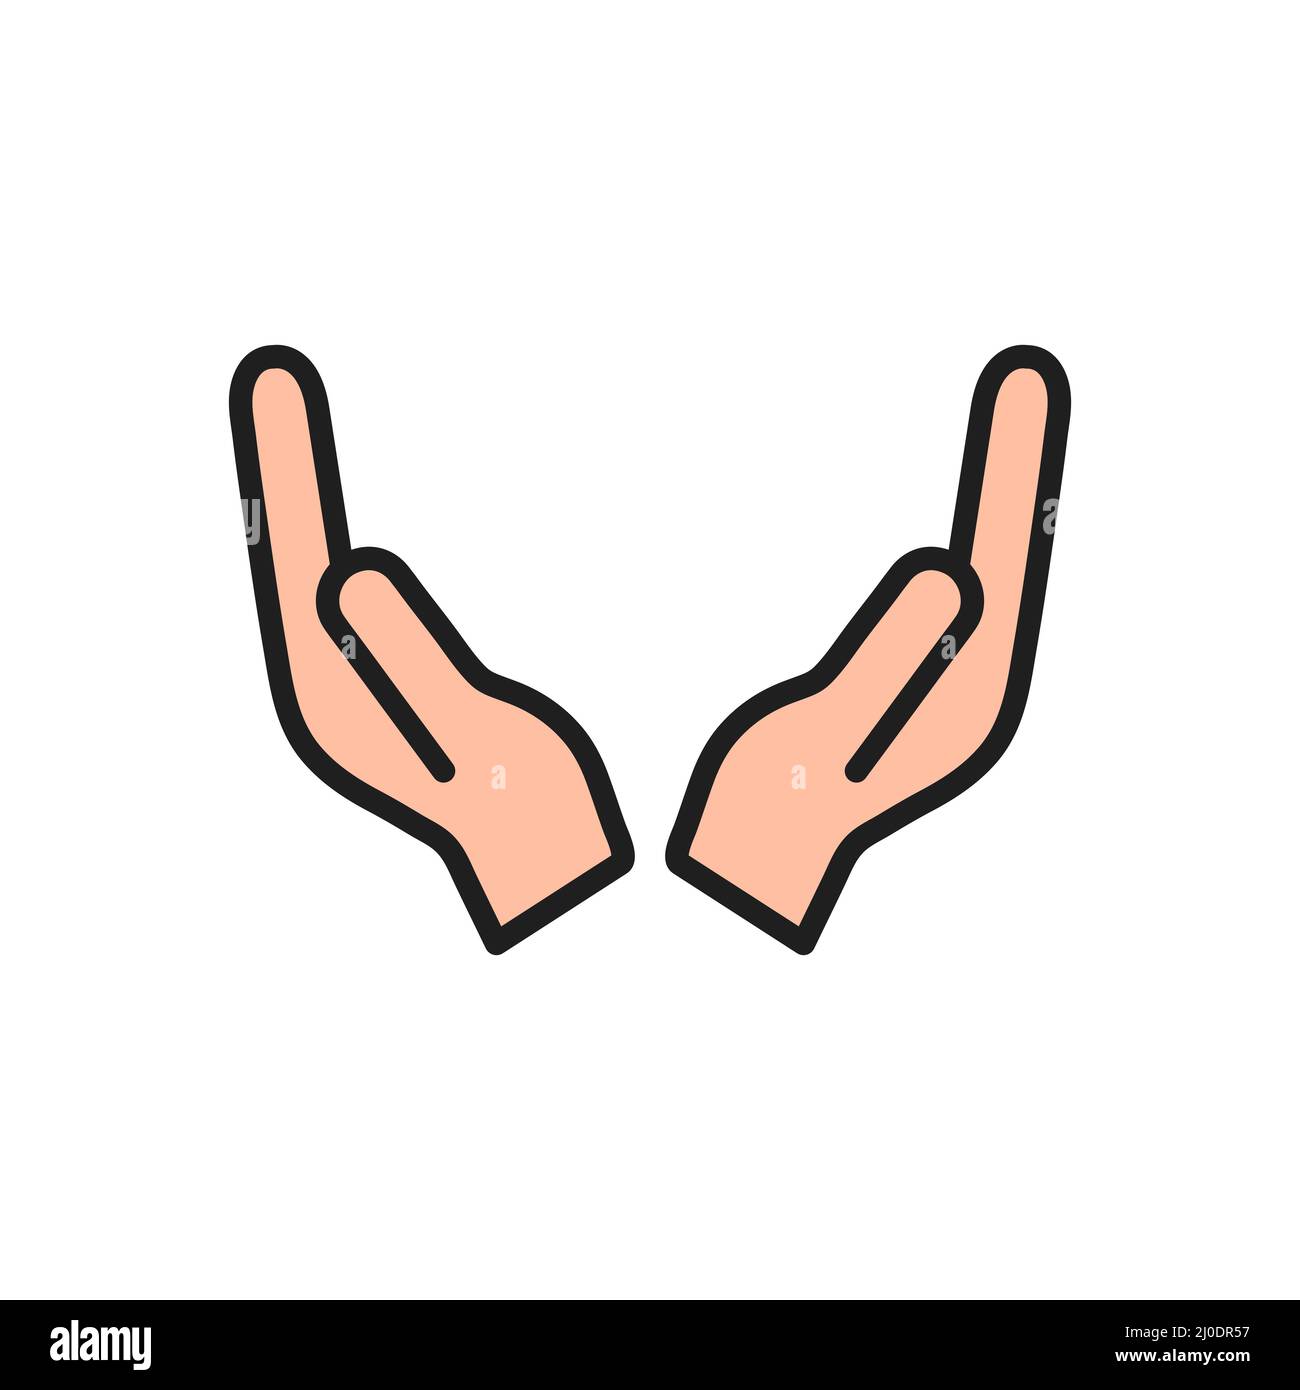 Strong arm - Openclipart